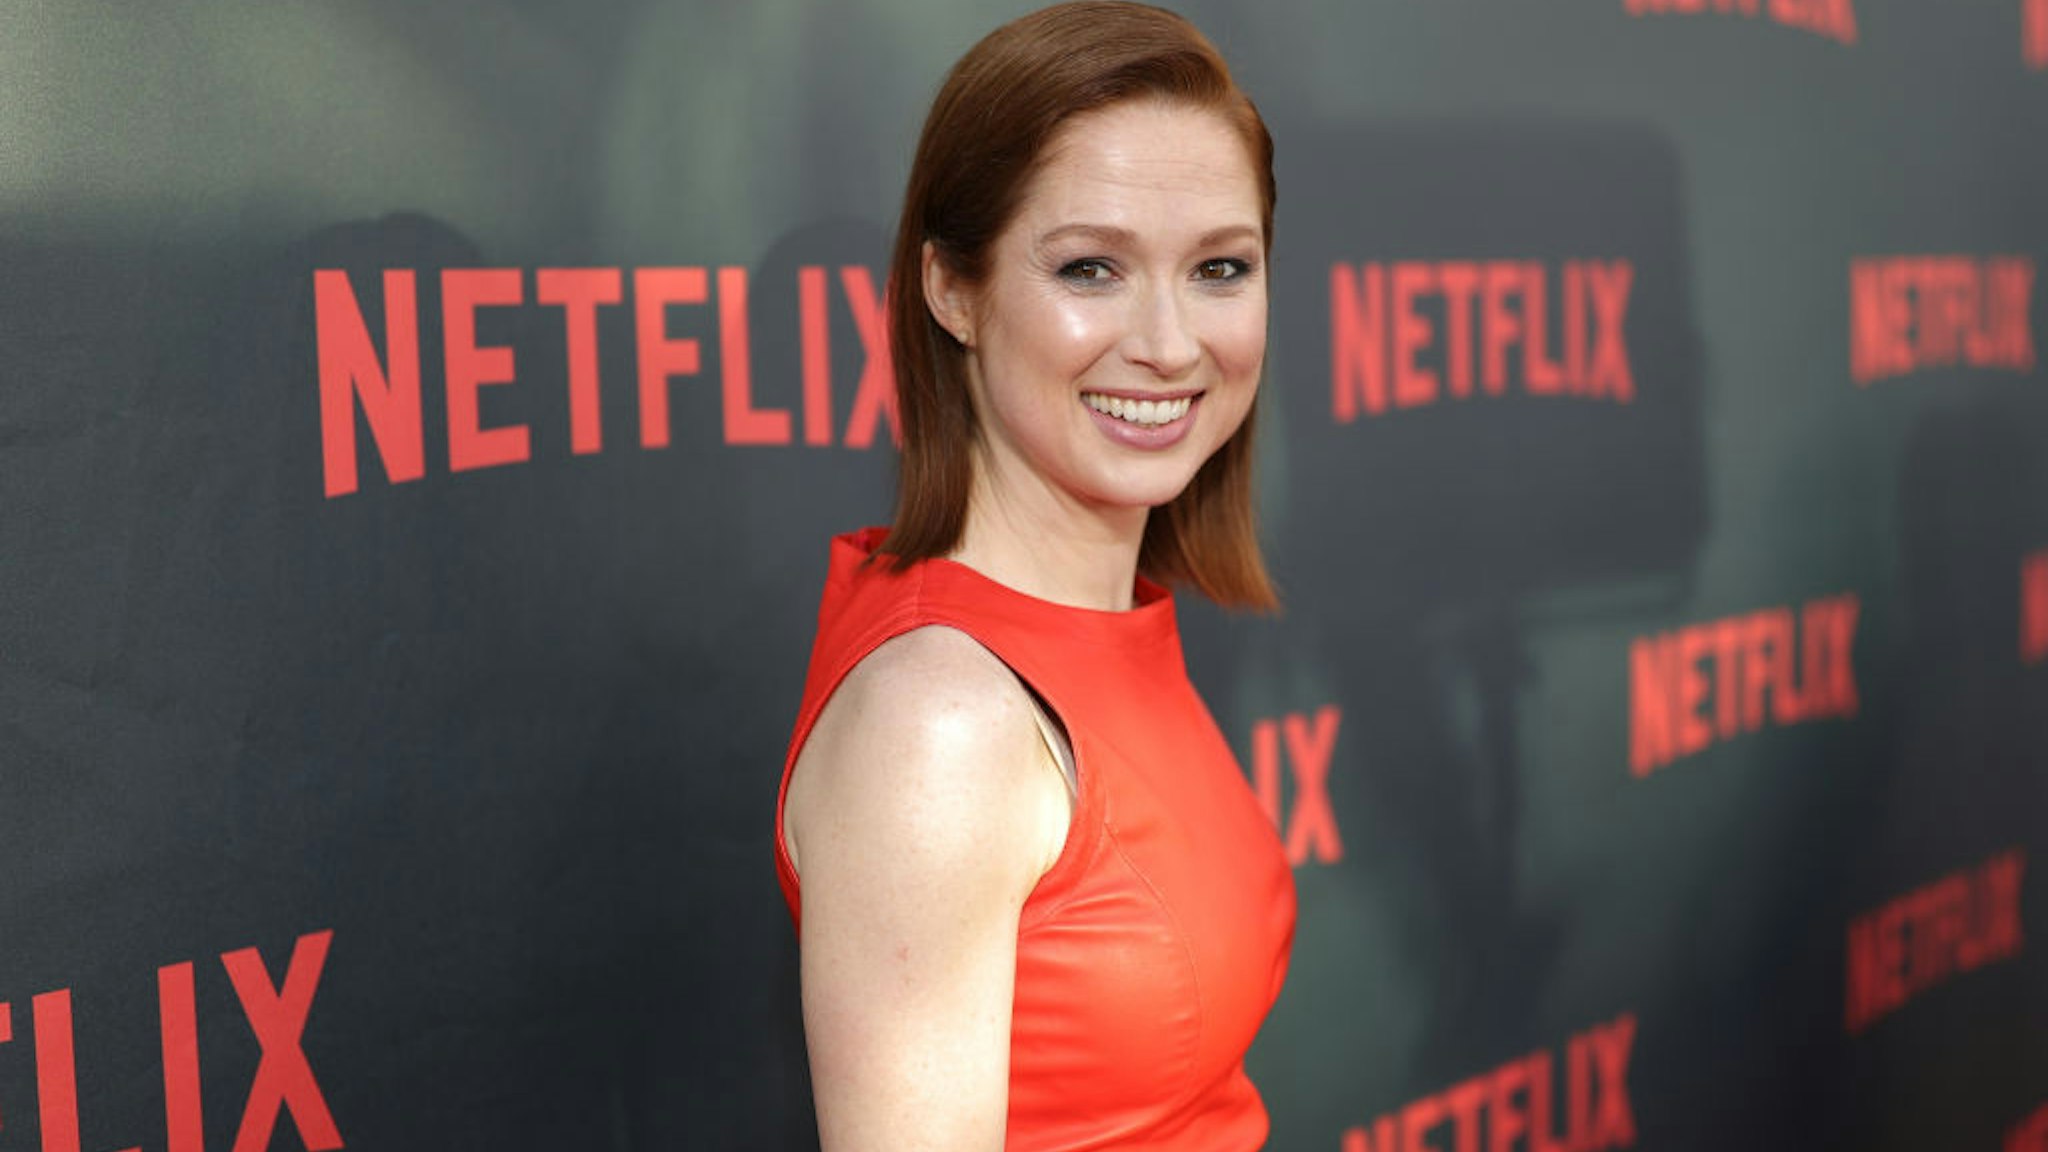 NORTH HOLLYWOOD, CA - MAY 04: Actress Ellie Kemper attends Netflix's "Unbreakable Kimmy Schmidt" for your consideration event red carpet at Saban Media Center on May 4, 2017 in North Hollywood, California. (Photo by Neilson Barnard/Getty Images)